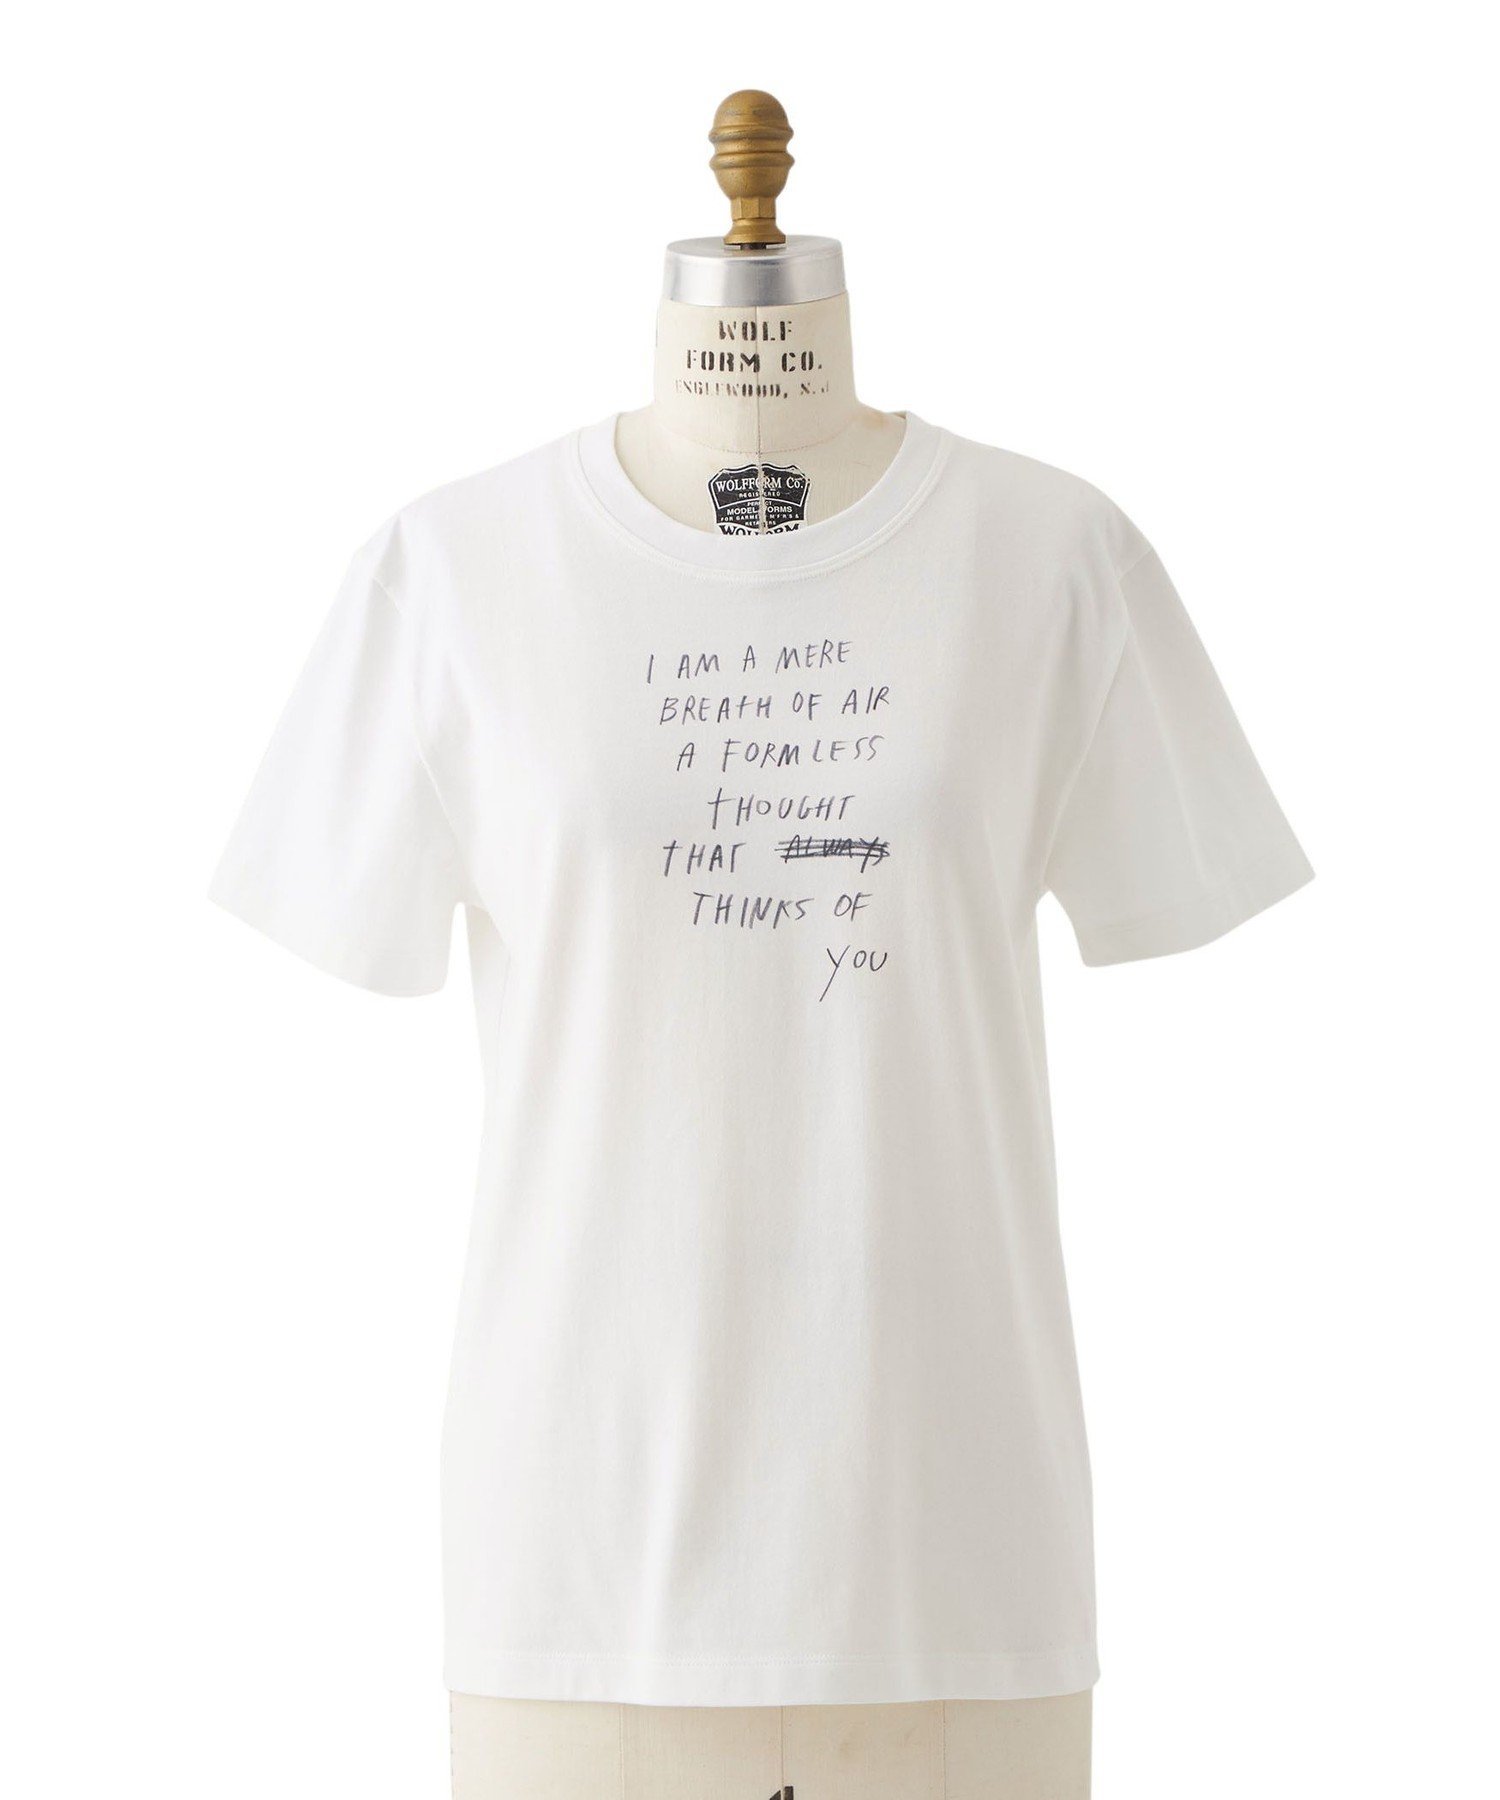 【SALE／30 OFF】DRAWER ＜Bernadette Marie Pascua x Drawer＞ WORDS プリントTEE1 ドゥロワー トップス カットソー Tシャツ ホワイト【送料無料】